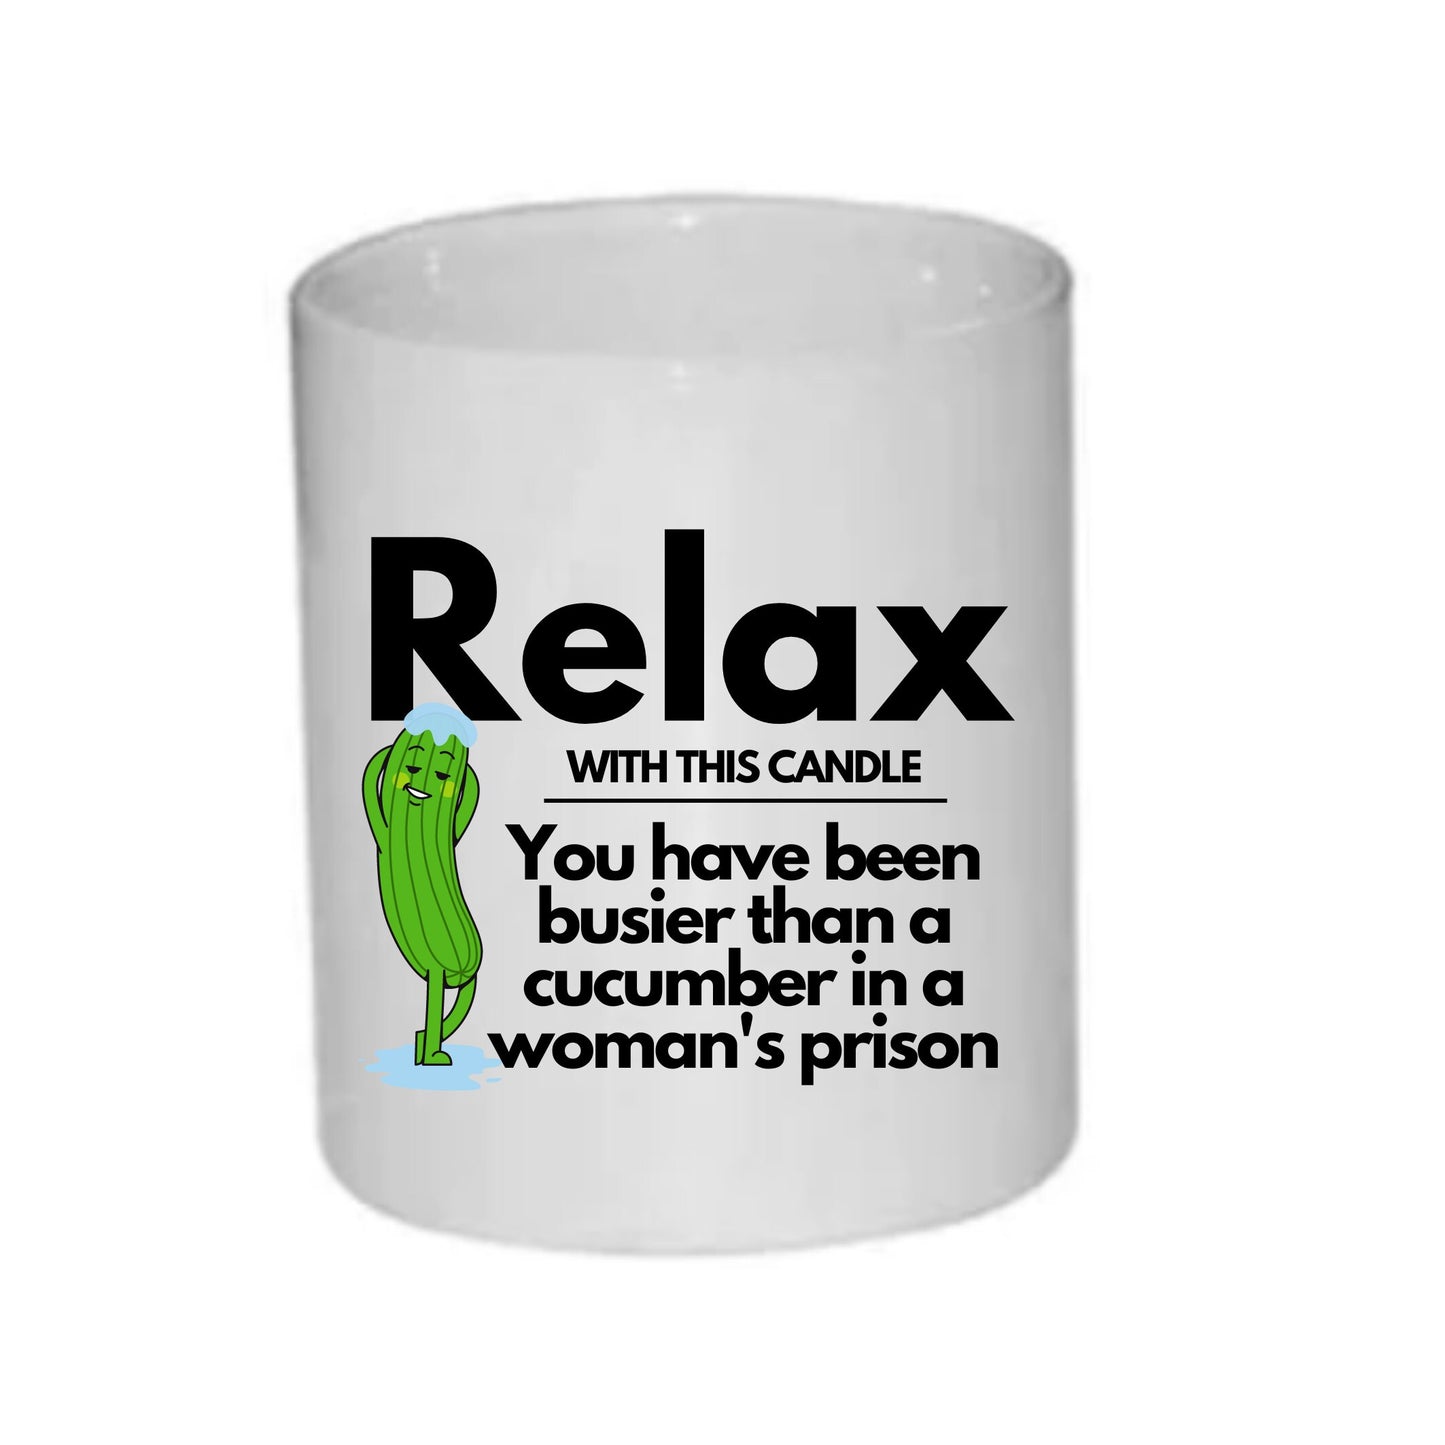 Relax you’ve been busier than a cucumber in a woman's prison candle